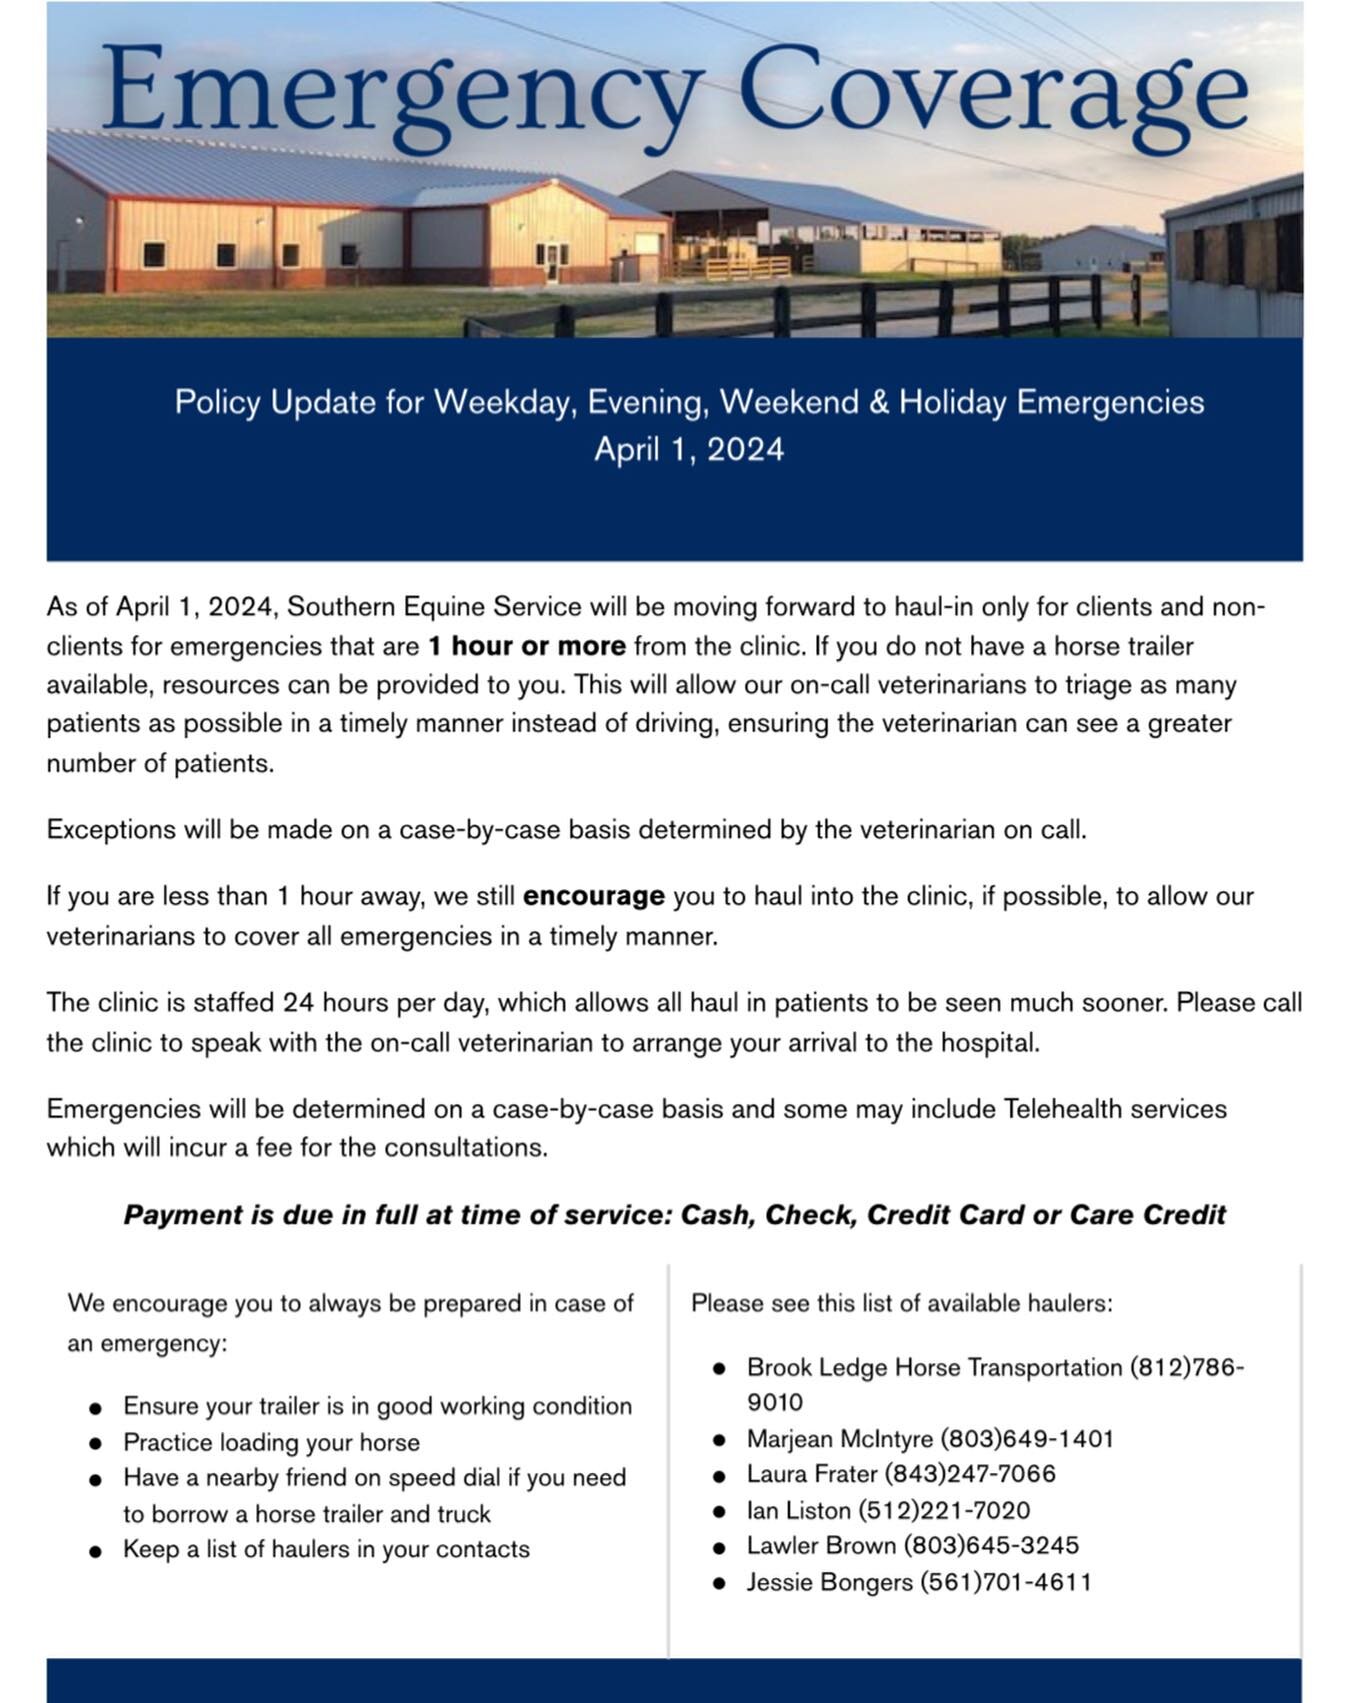 Please see our updated emergency policy as of April 1, 2024.